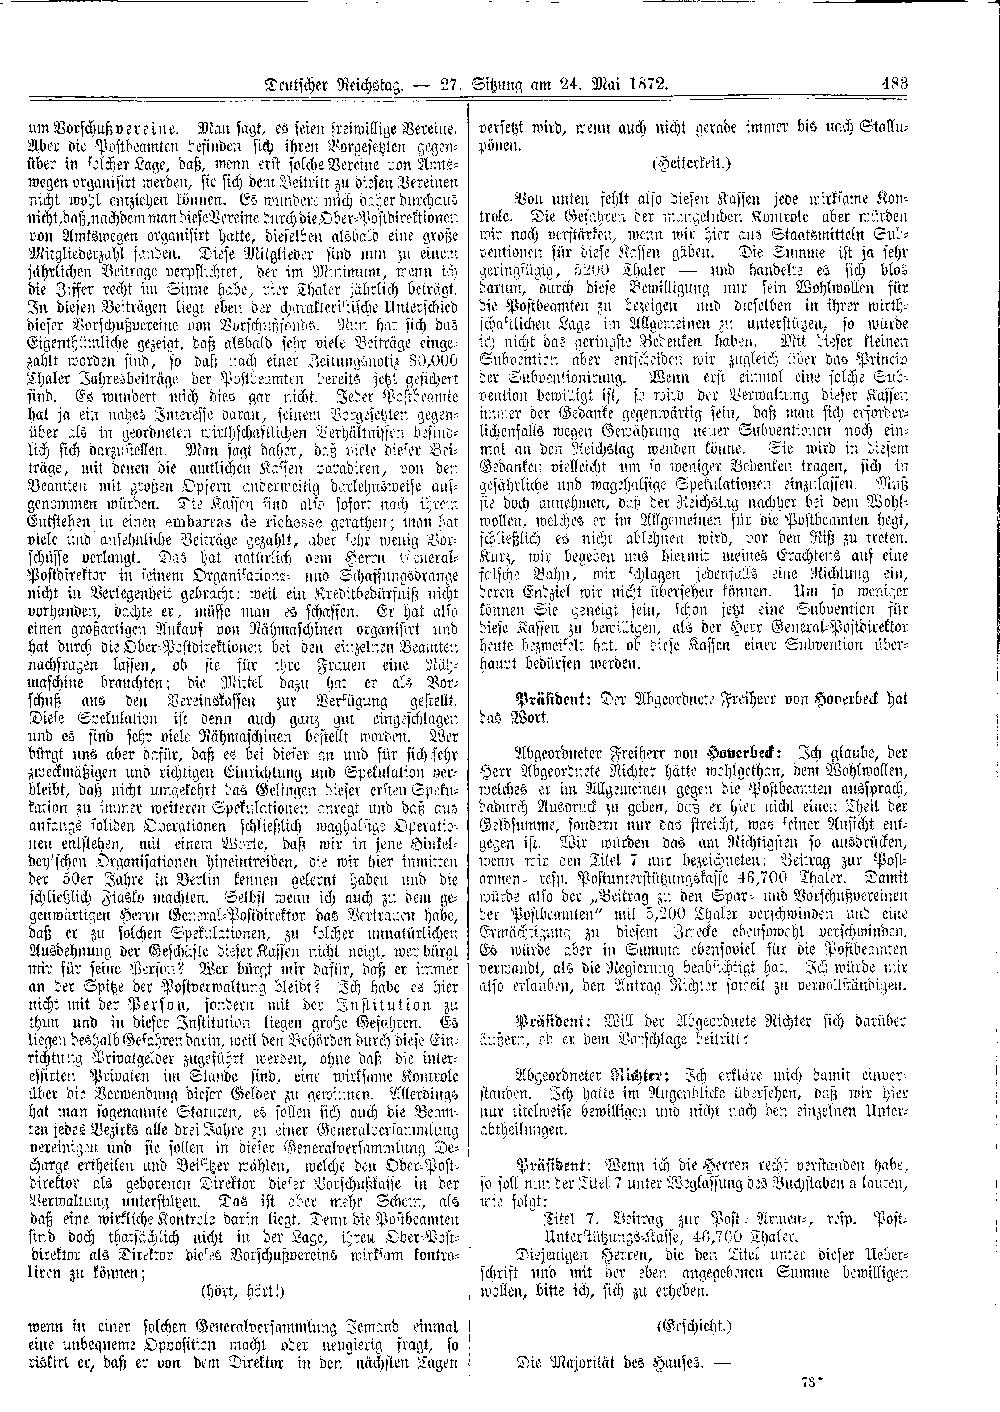 Scan of page 483